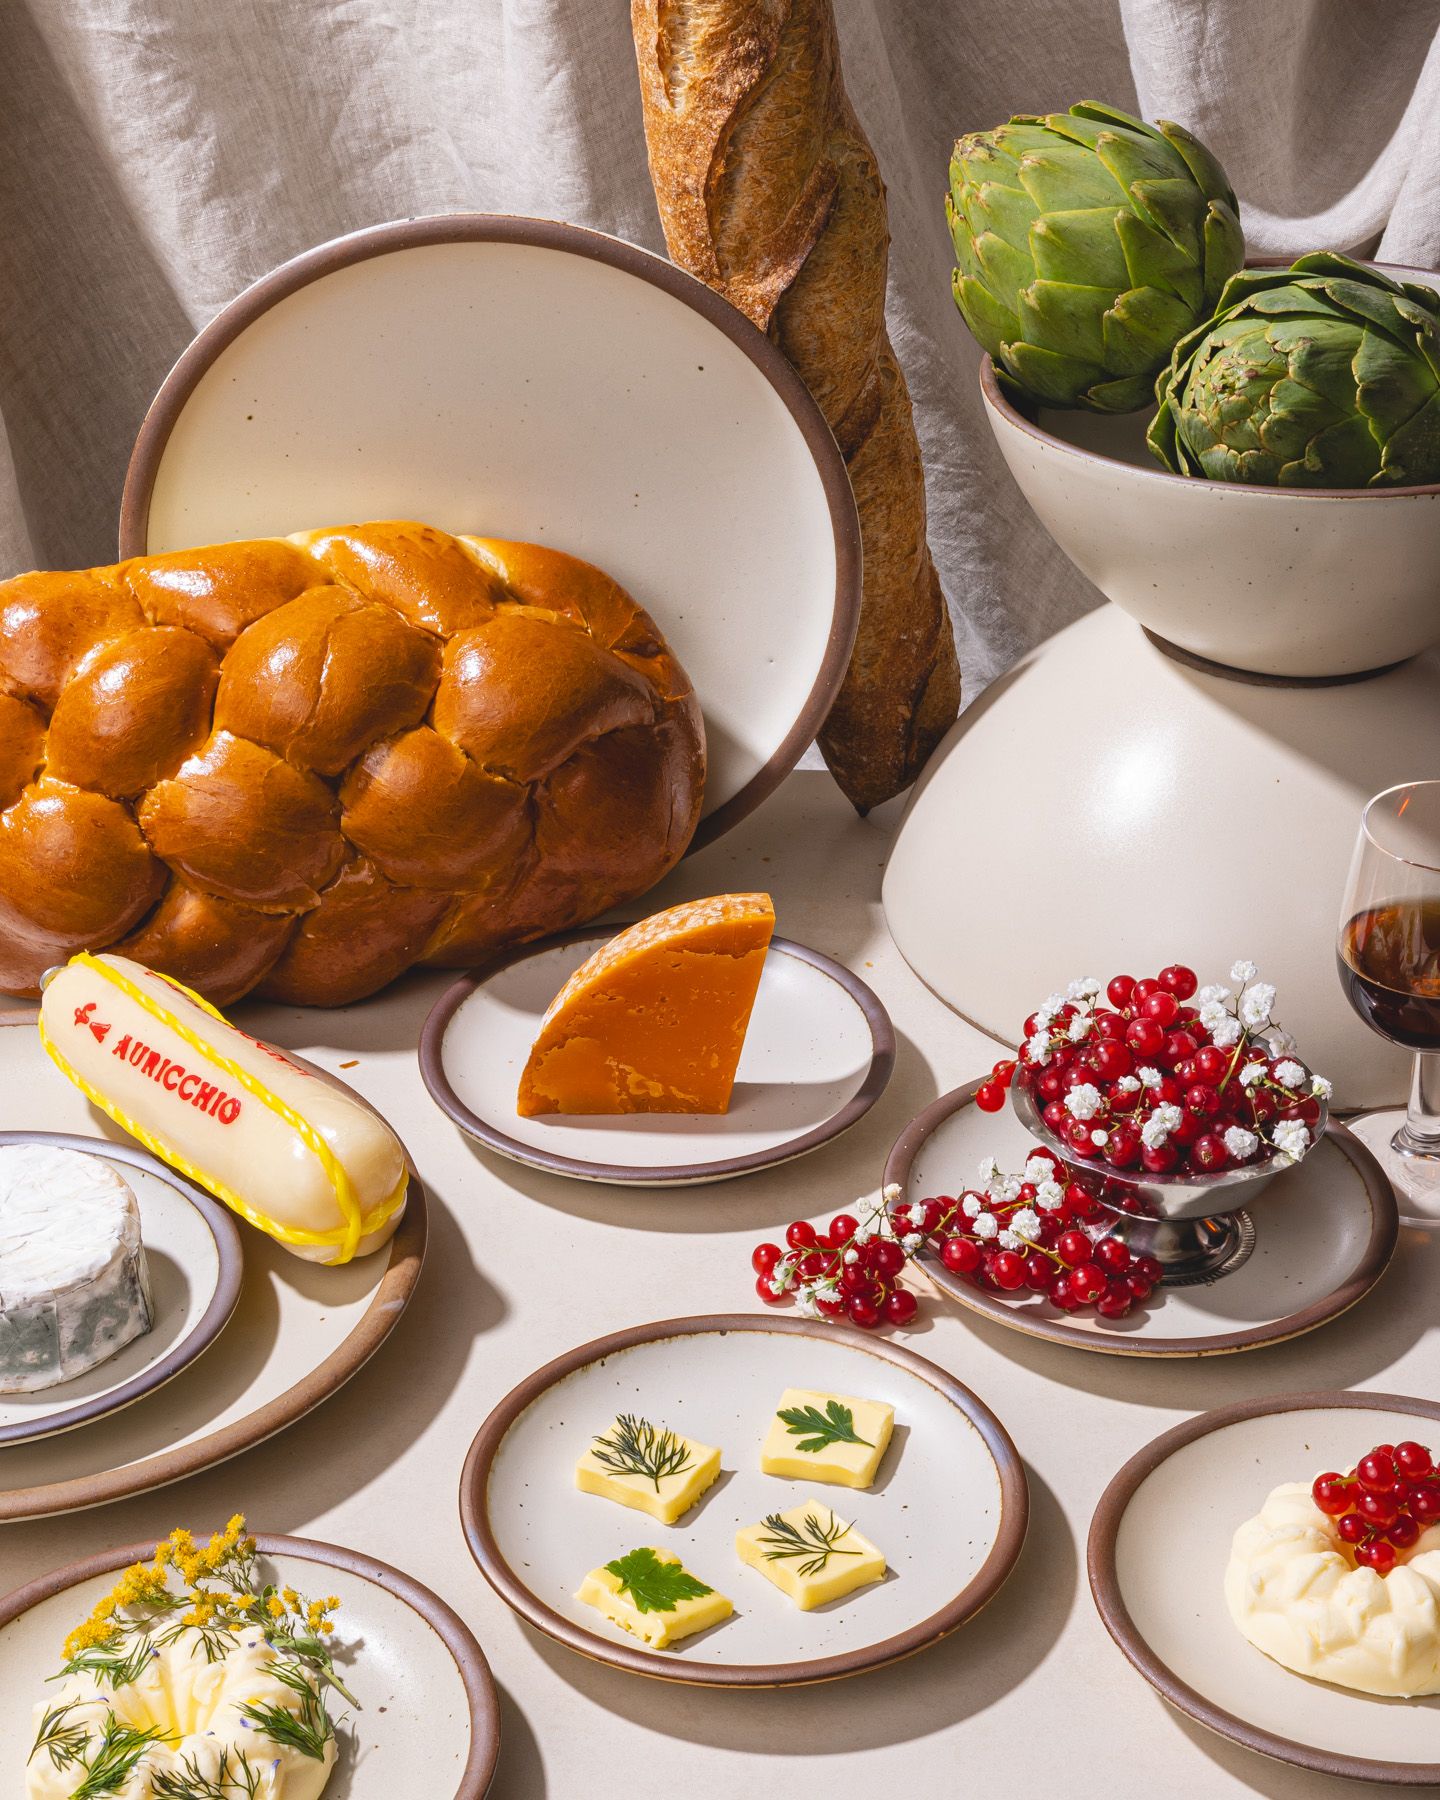 An artful display of cream ceramic plates with foods like berries, butter slices, bread, cheese, artichokes and more all around.